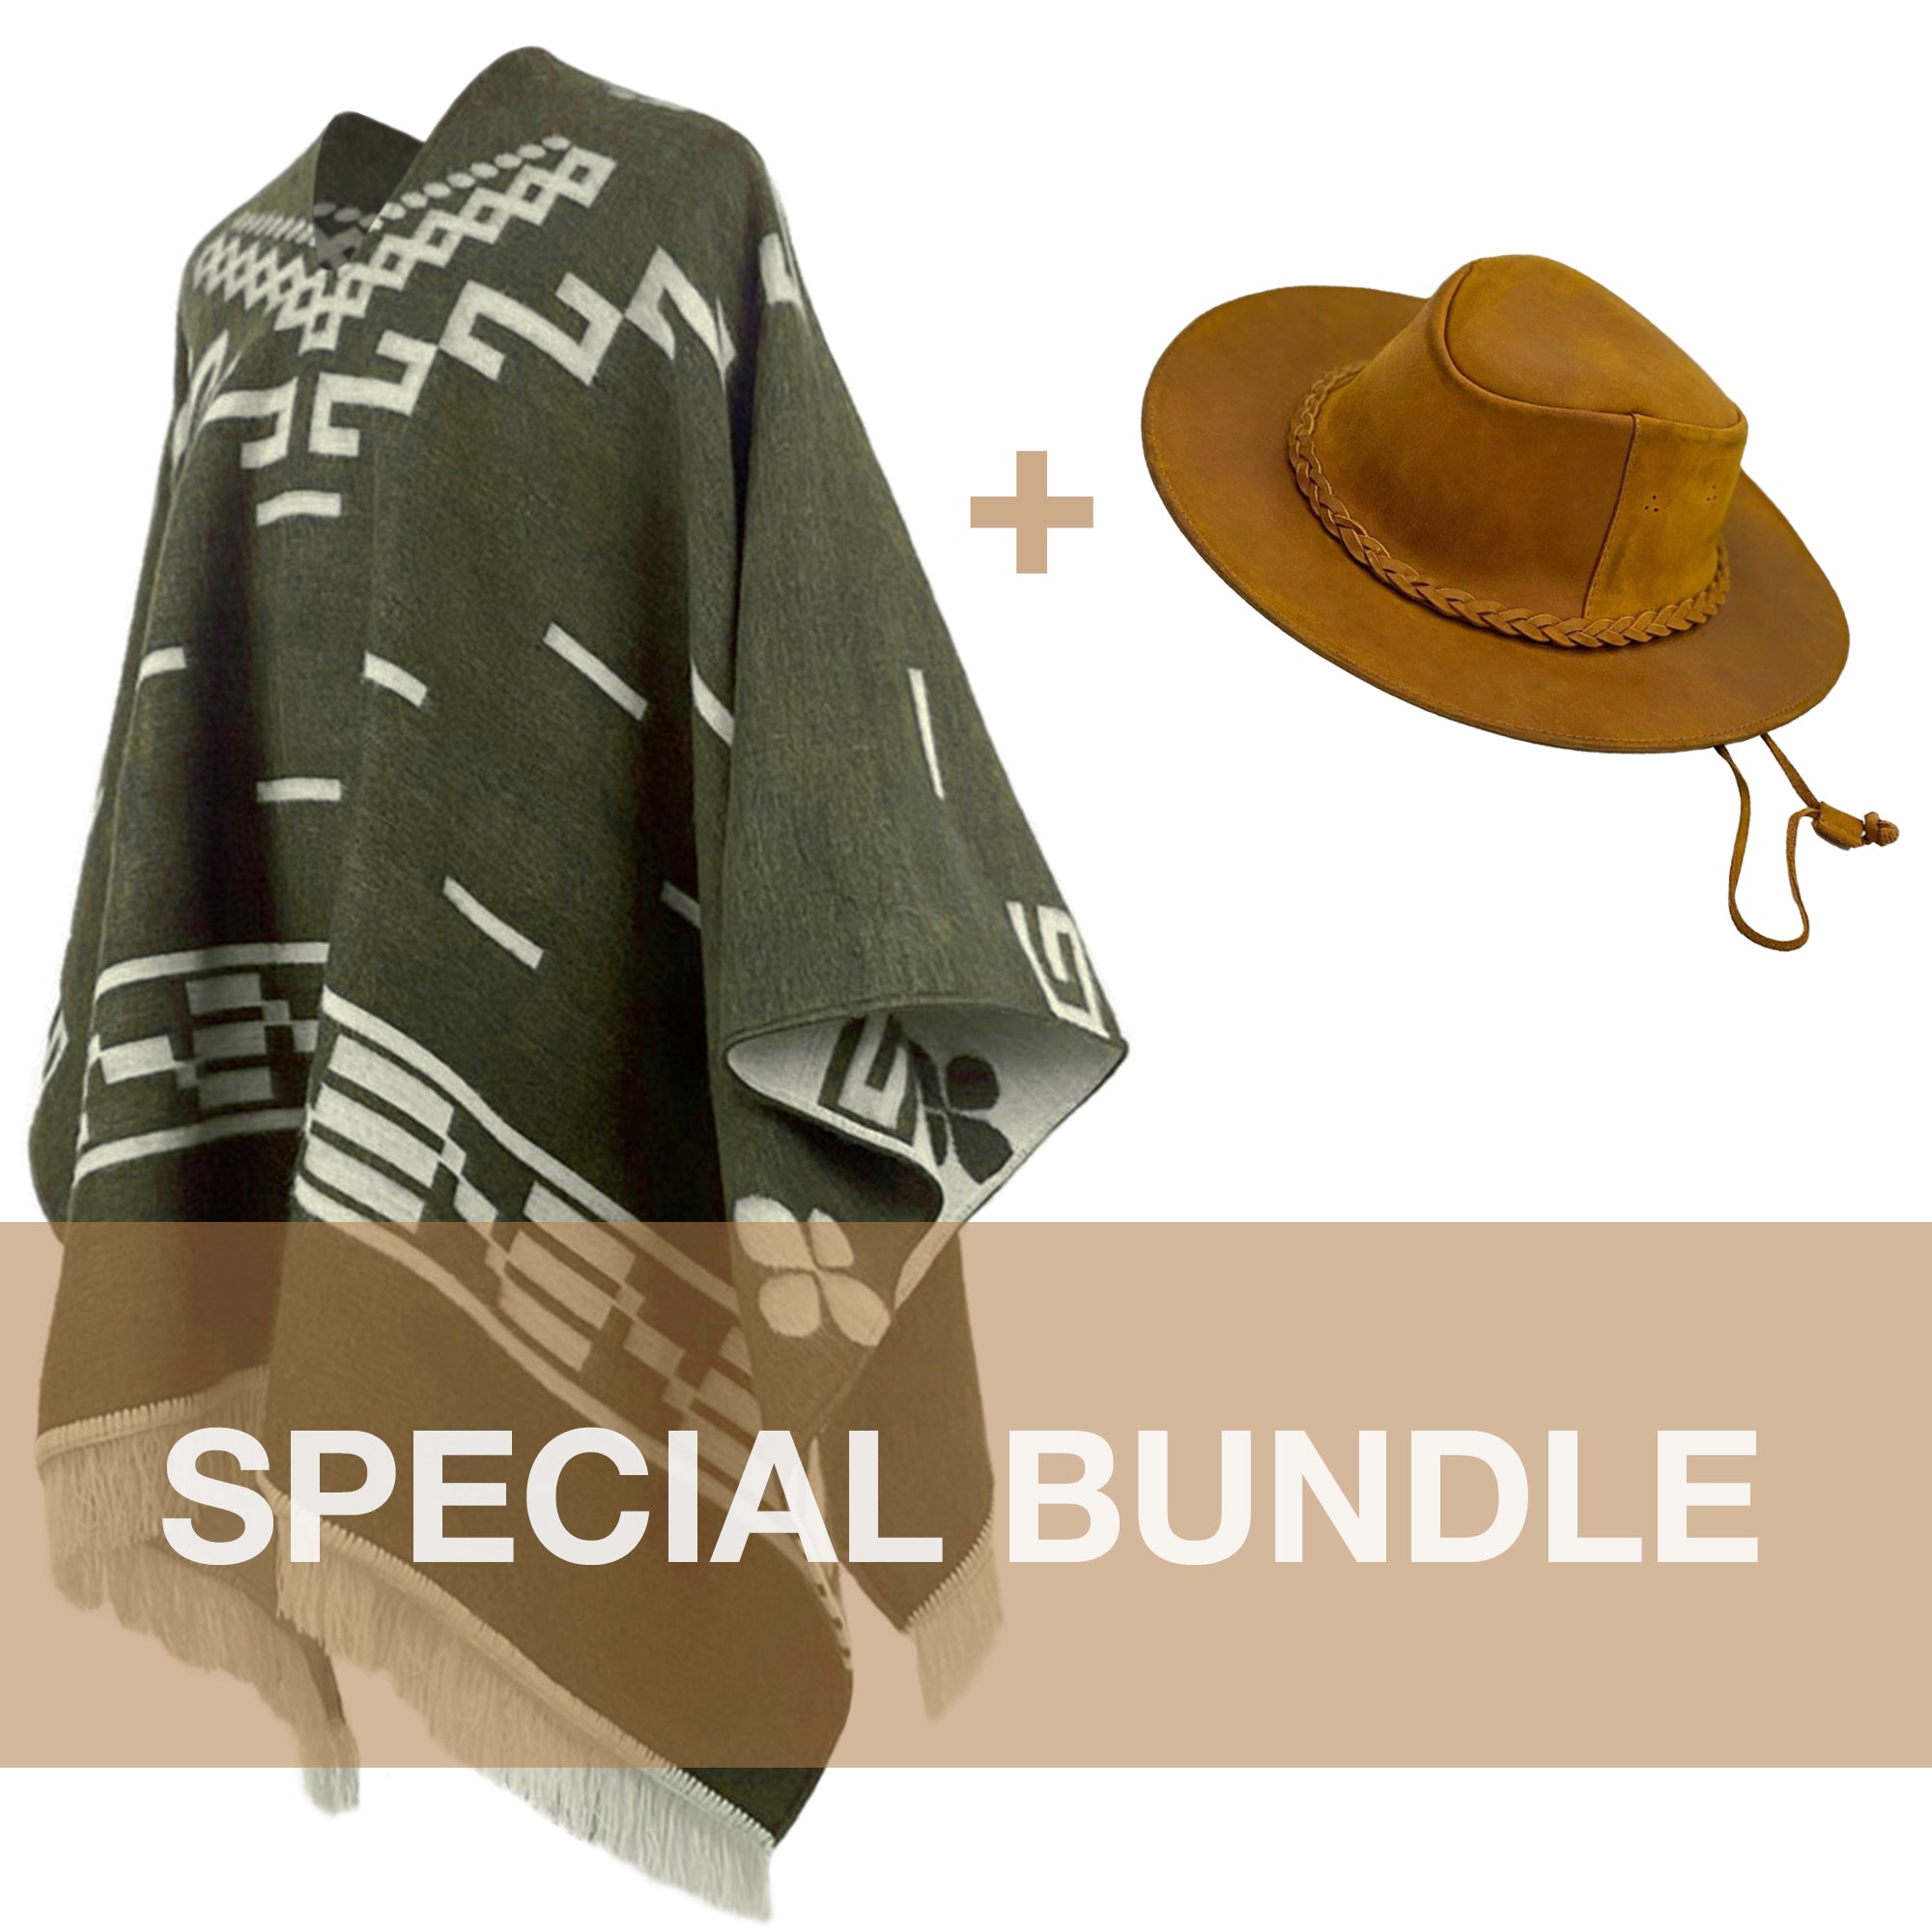 Clint Eastwood Western Cowboy bundle - buy a poncho and a hat and SAVE!